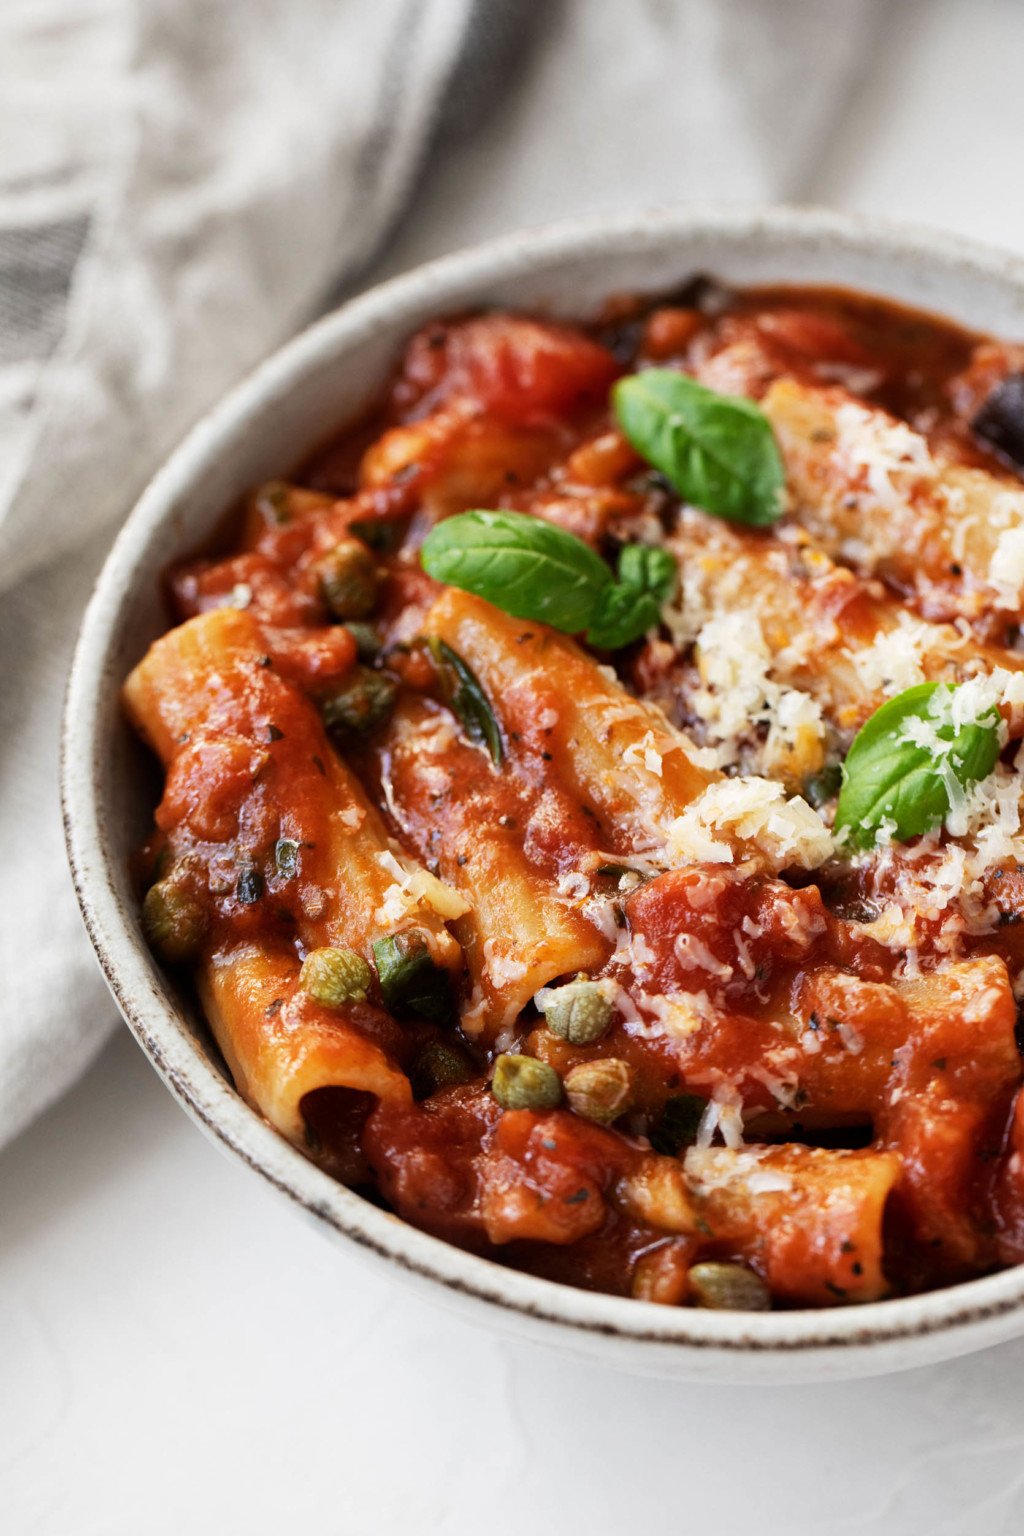 A angled photograph of a tomato and eggplant based pasta dish, which has been prepared with rigatoni and topped with small basil leaves.